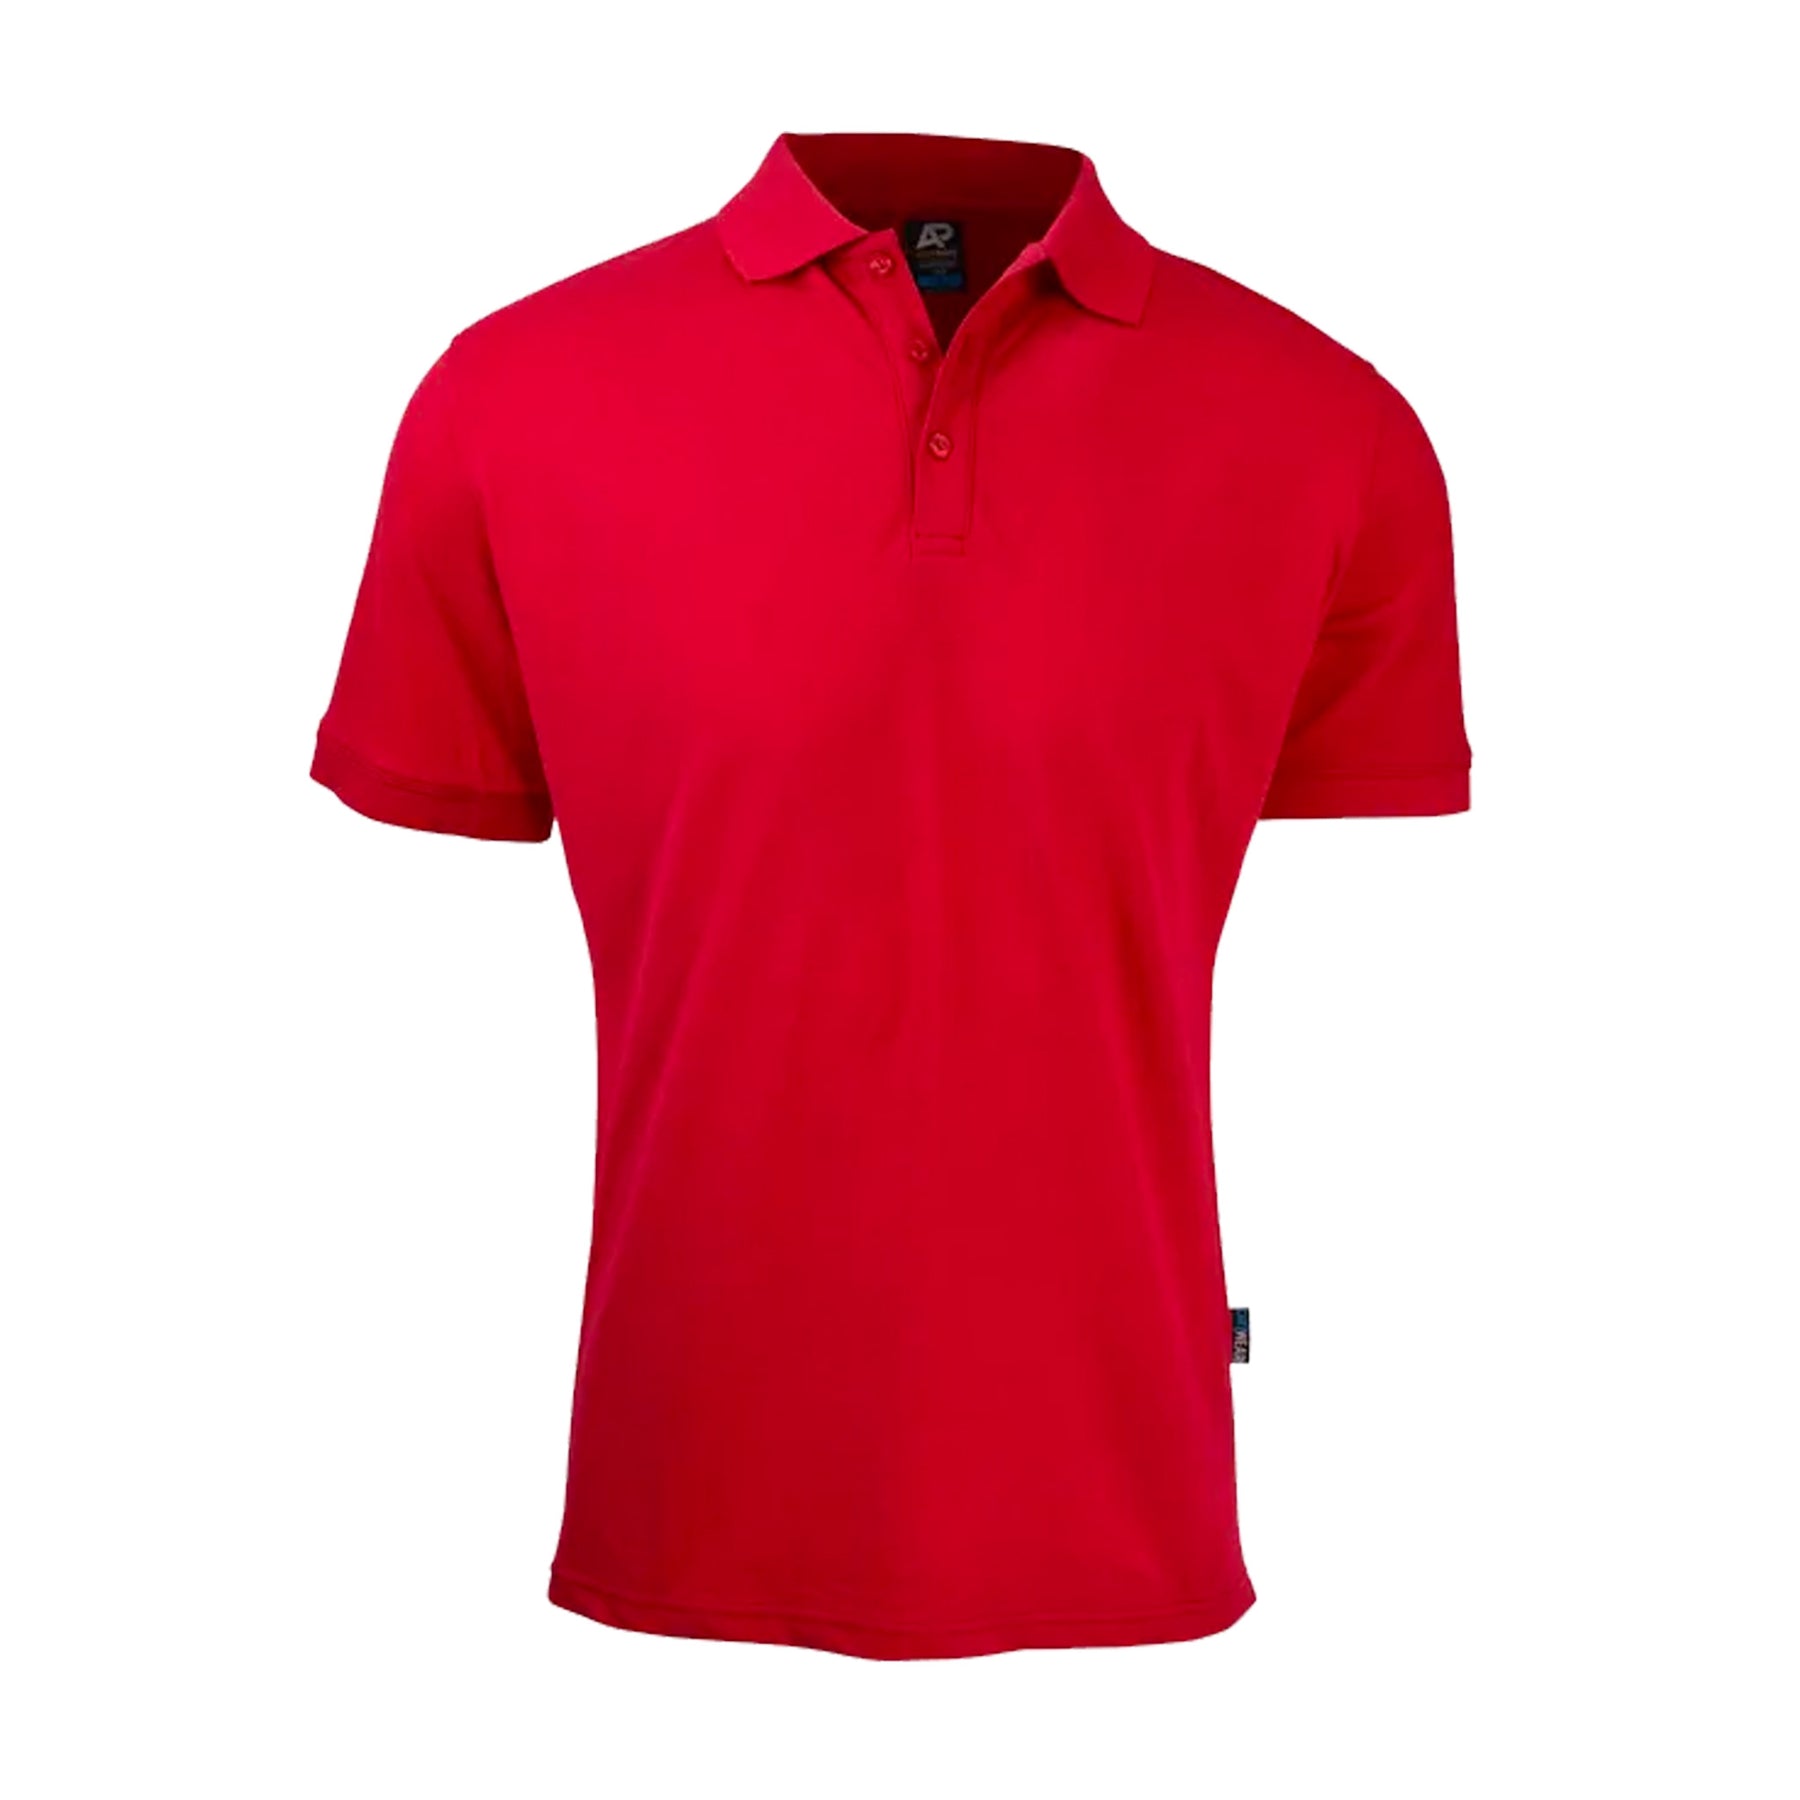 aussie pacific claremont mens polo in red